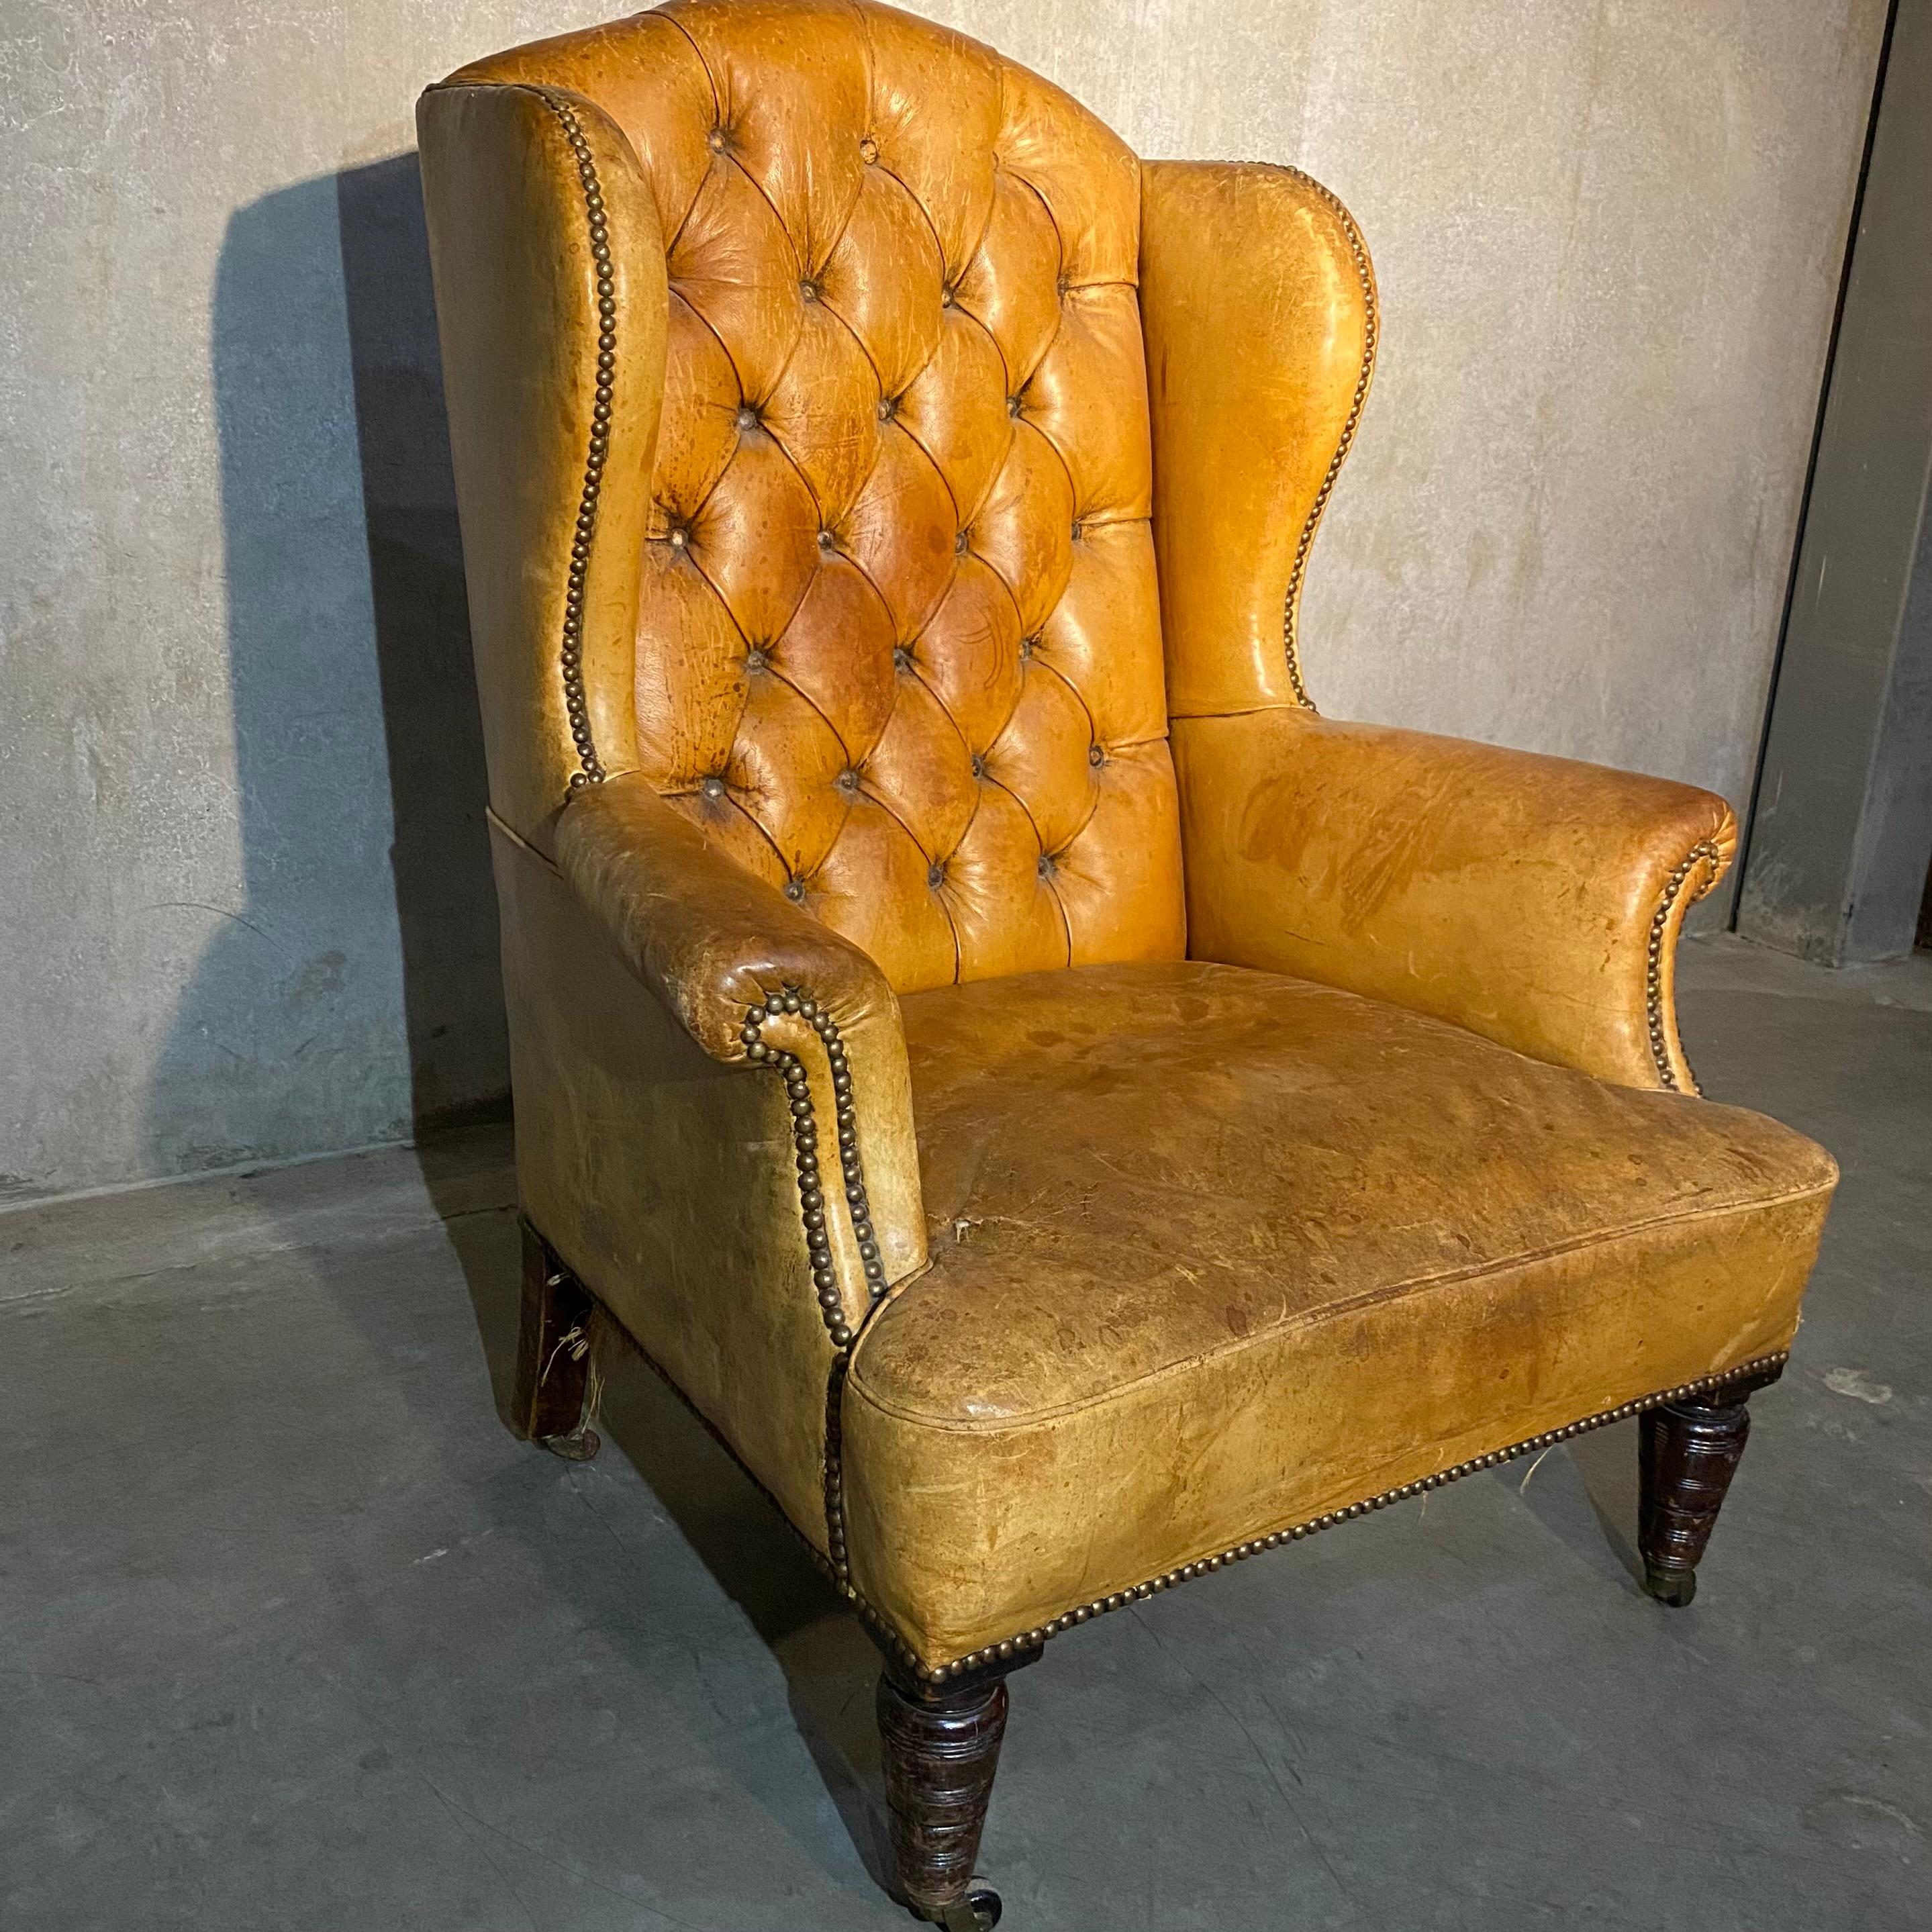 Every now an then a beauty shows up ..this is a very nice antique English wingback with the perfect worn leather tones. Original finnish, untouched. We acquired this from a long retired antique dealer who cherished this for over 50 years, to be